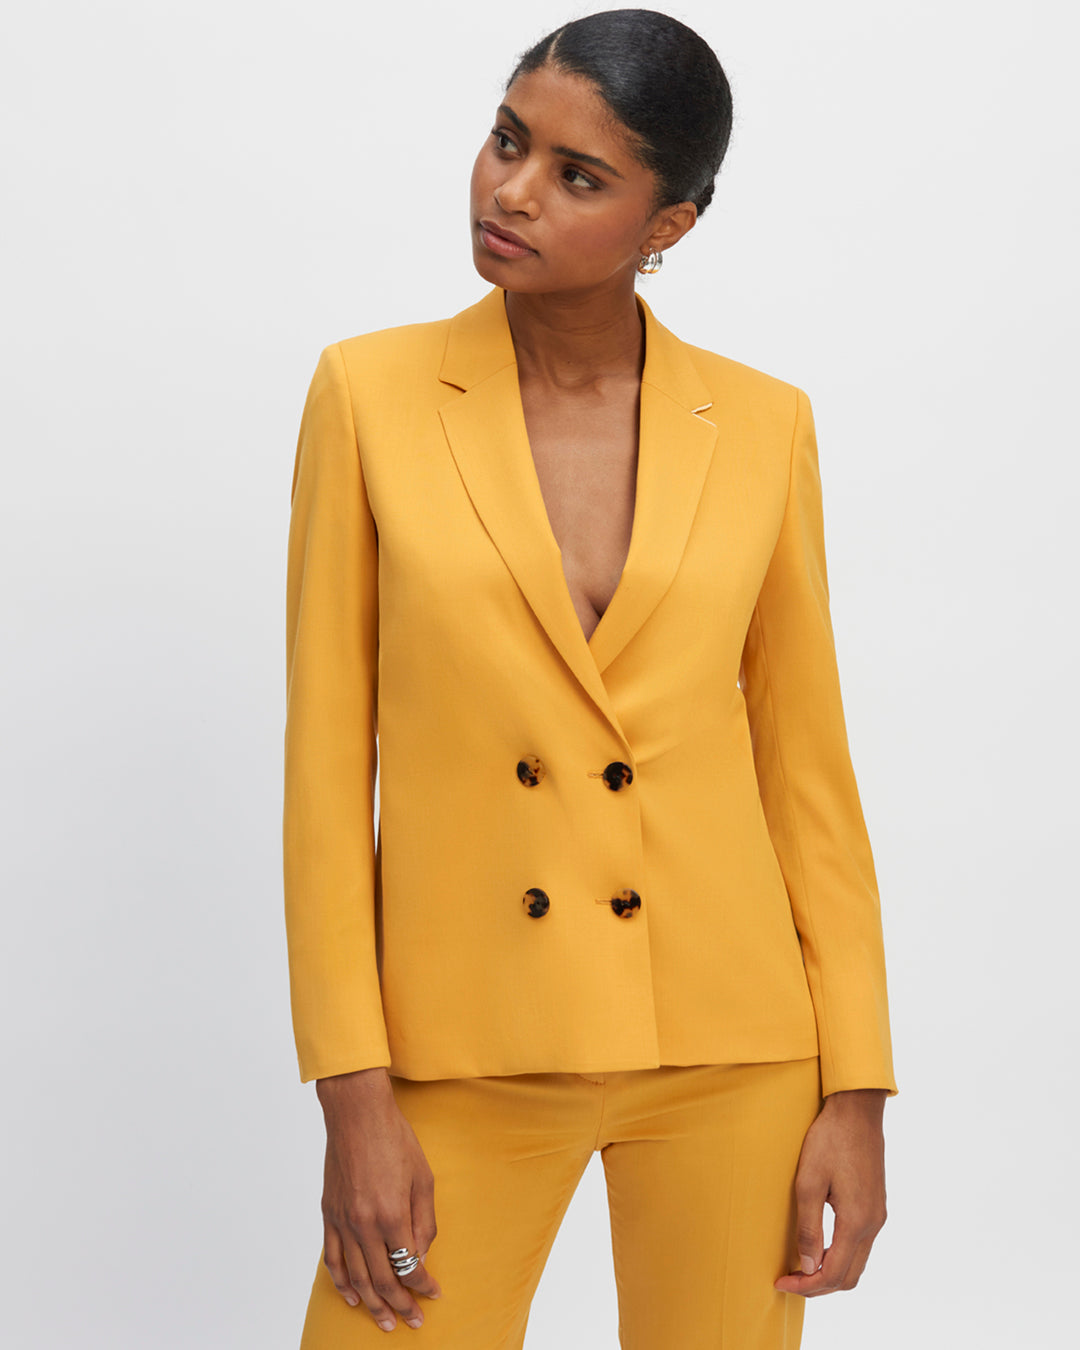 Jacket-yellow-cut-right-crossed-double-buttoned-collar-wholly-lined-17H10-knit-jacket-for-women-paris-